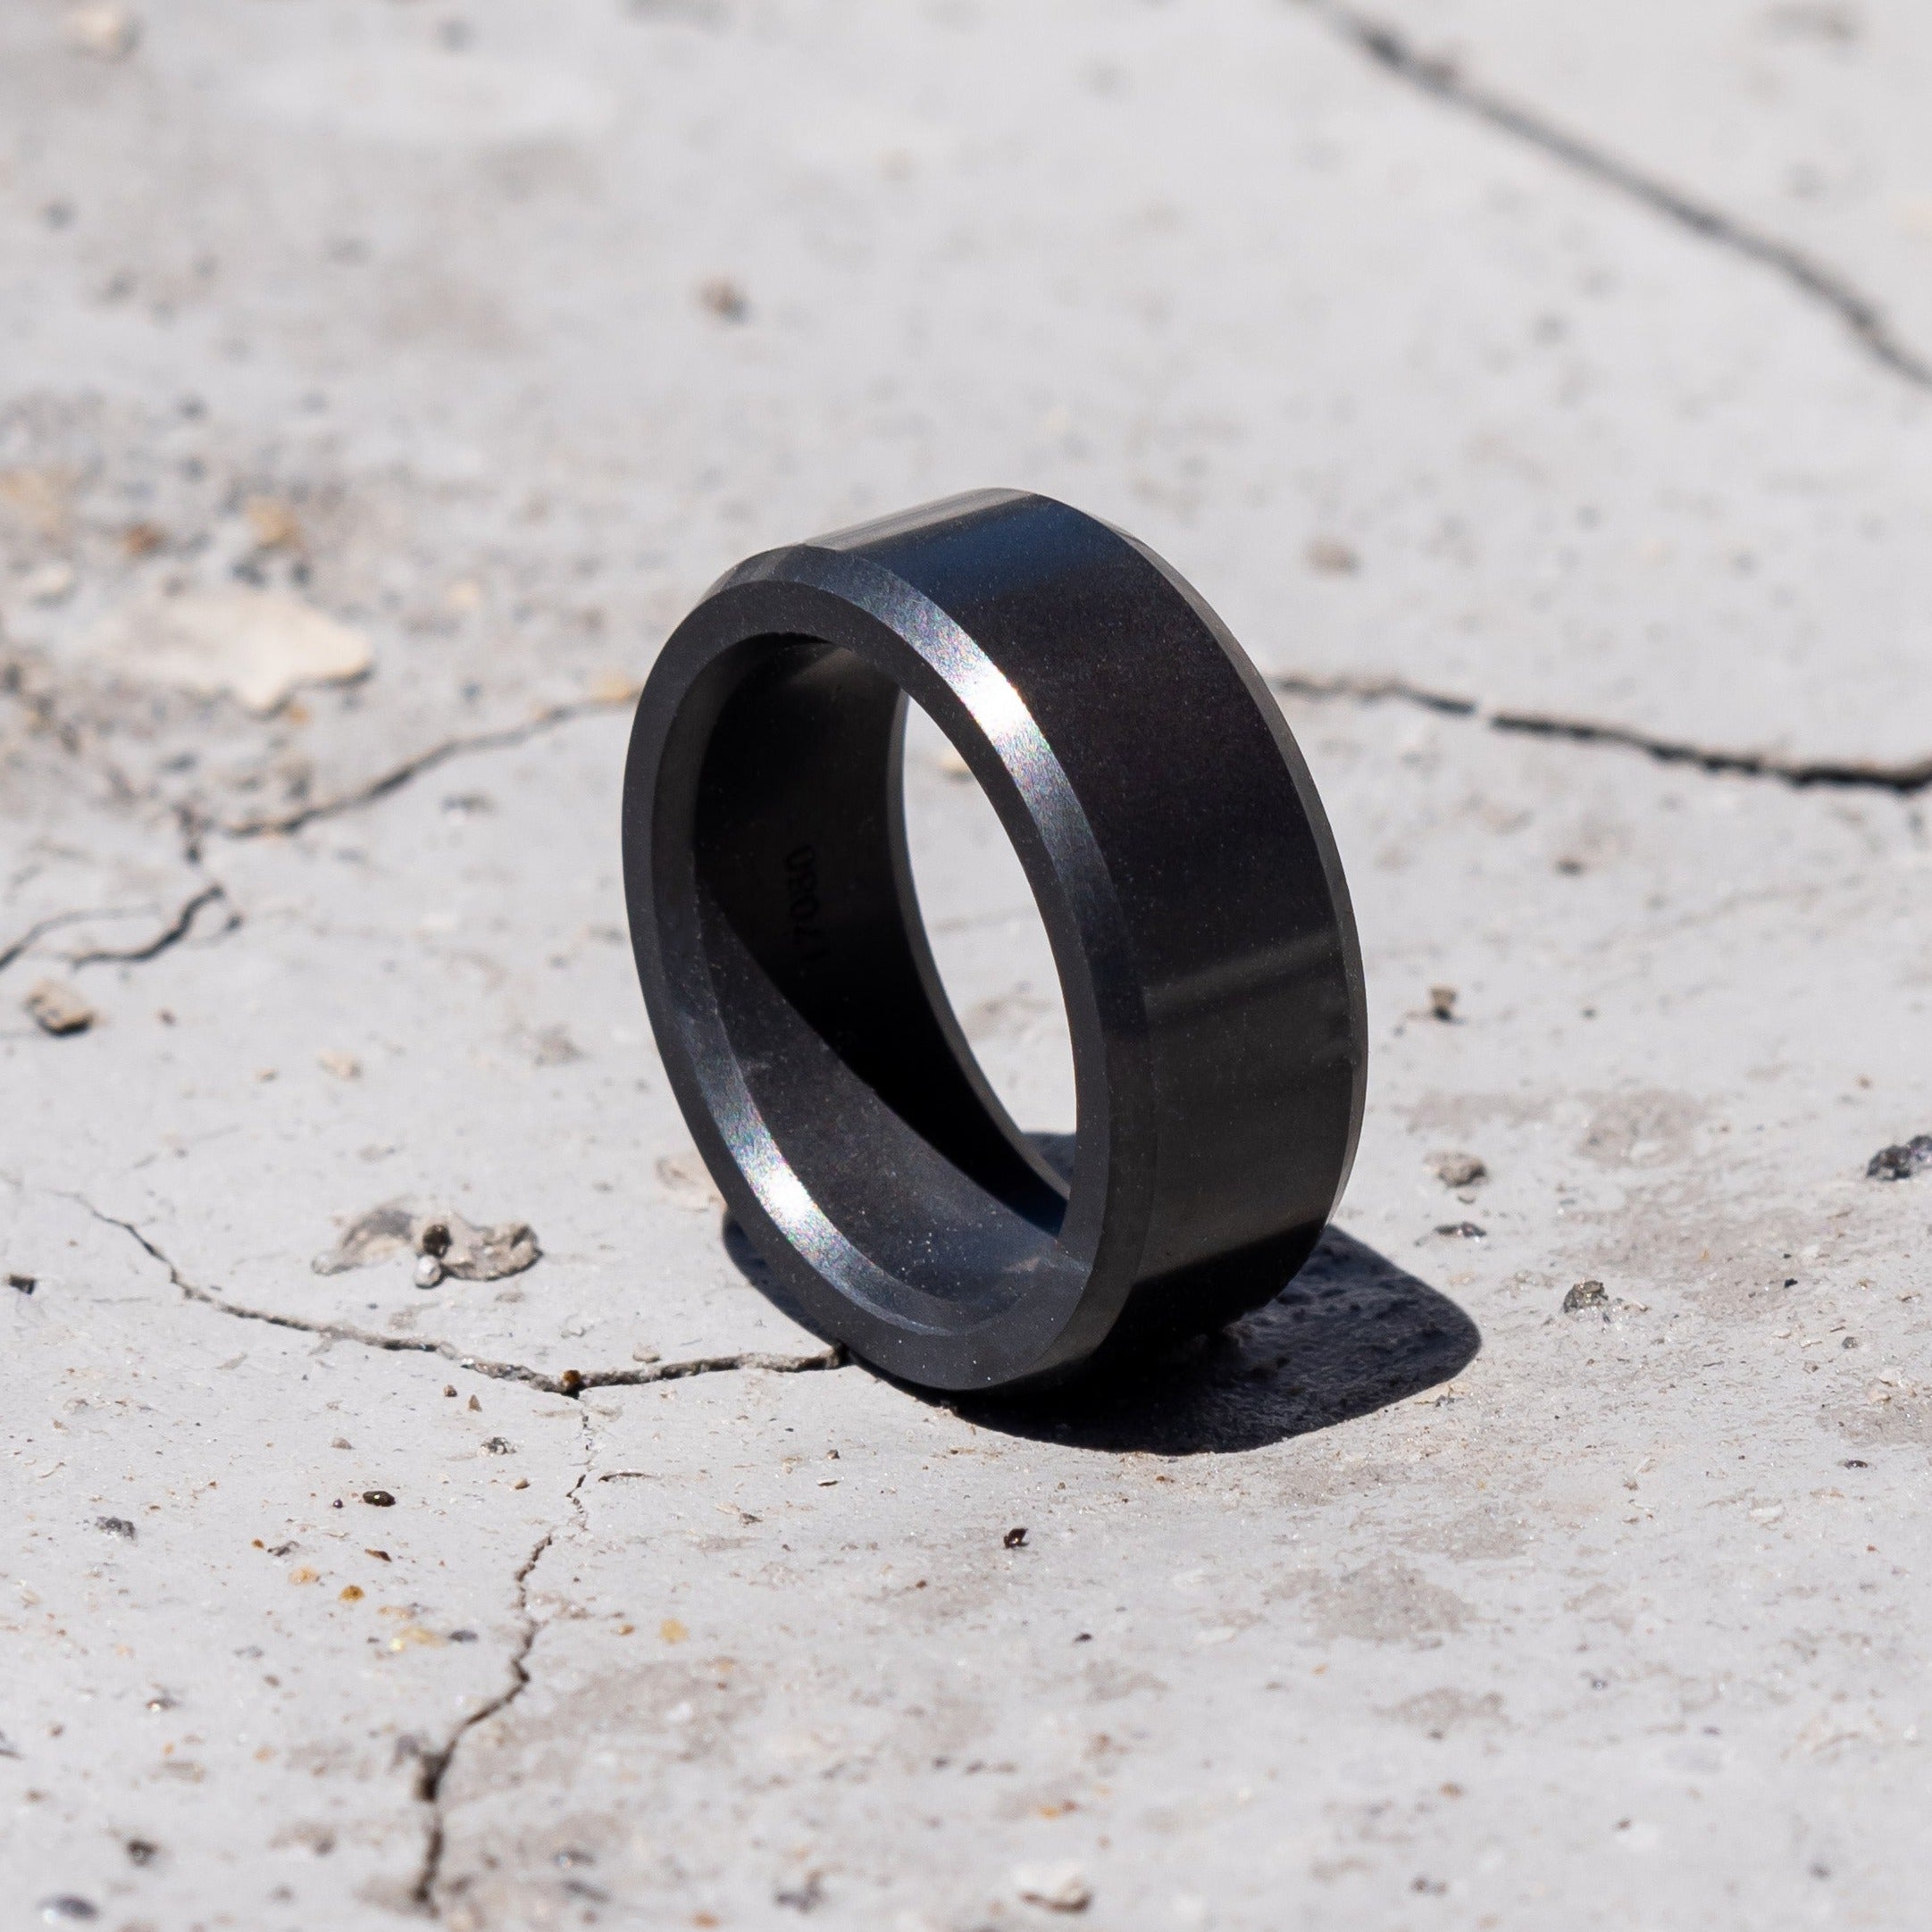 Ring shot #1 of men's hands wearing our Elysium ARES solid black diamond ring resting on a marble surface | Men’s Black Diamond Rings | Black Wedding Bands